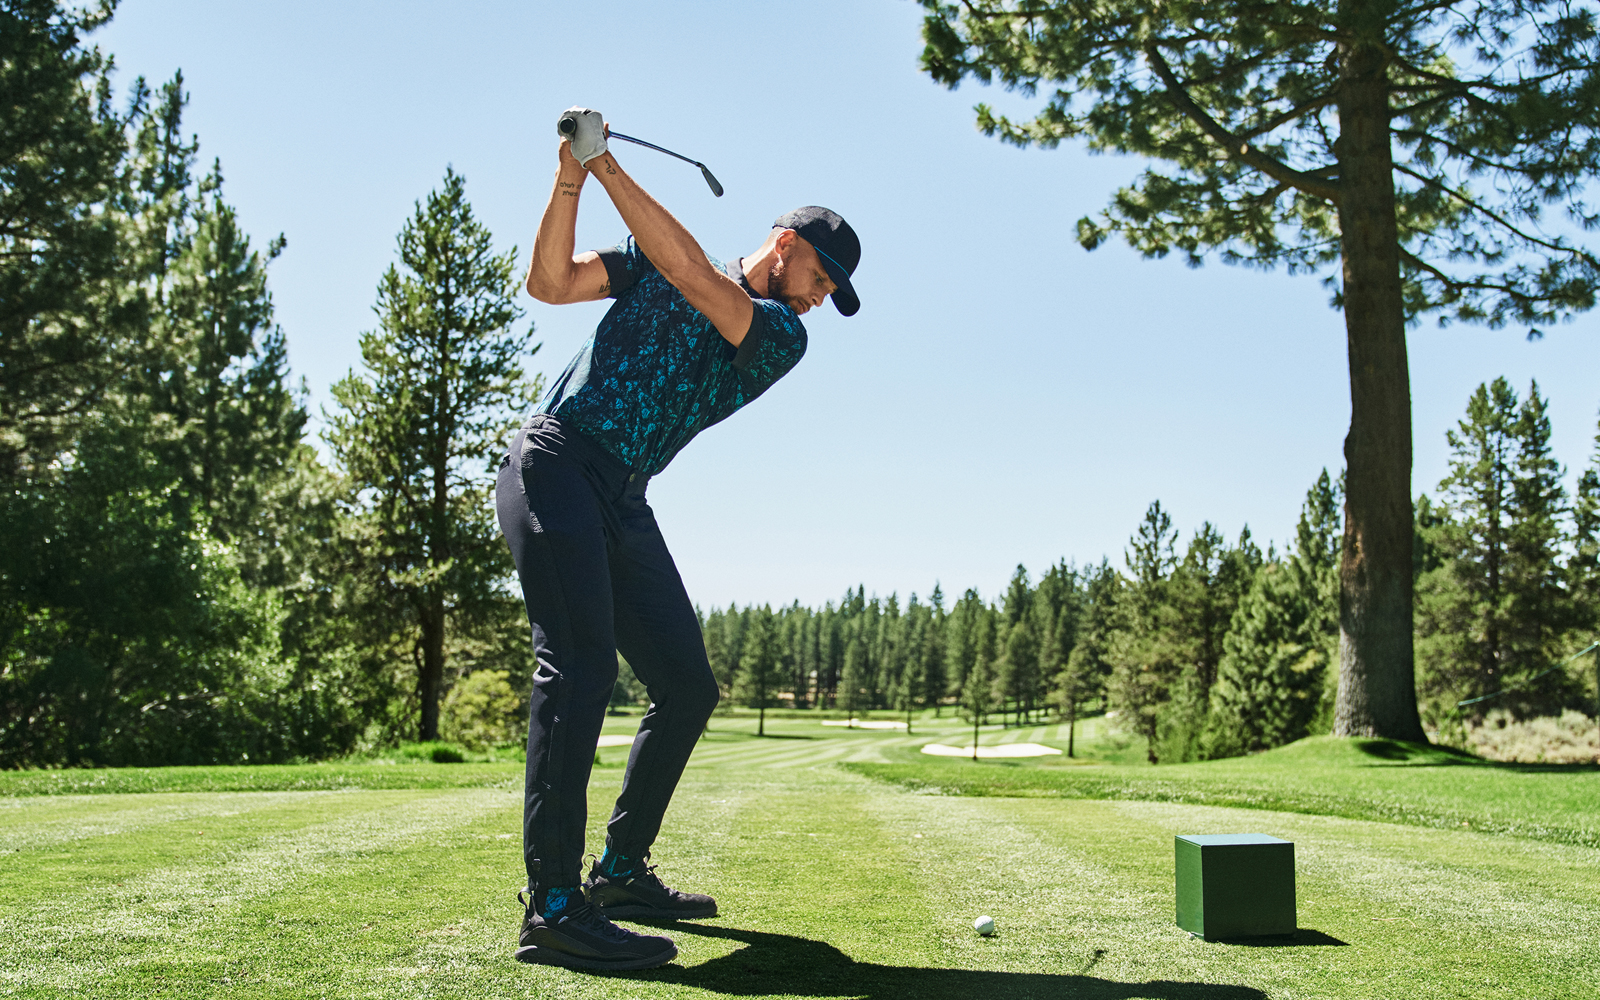 teph Curry Adds His Expressive Style to Curry Brand’s Latest Golf Collection